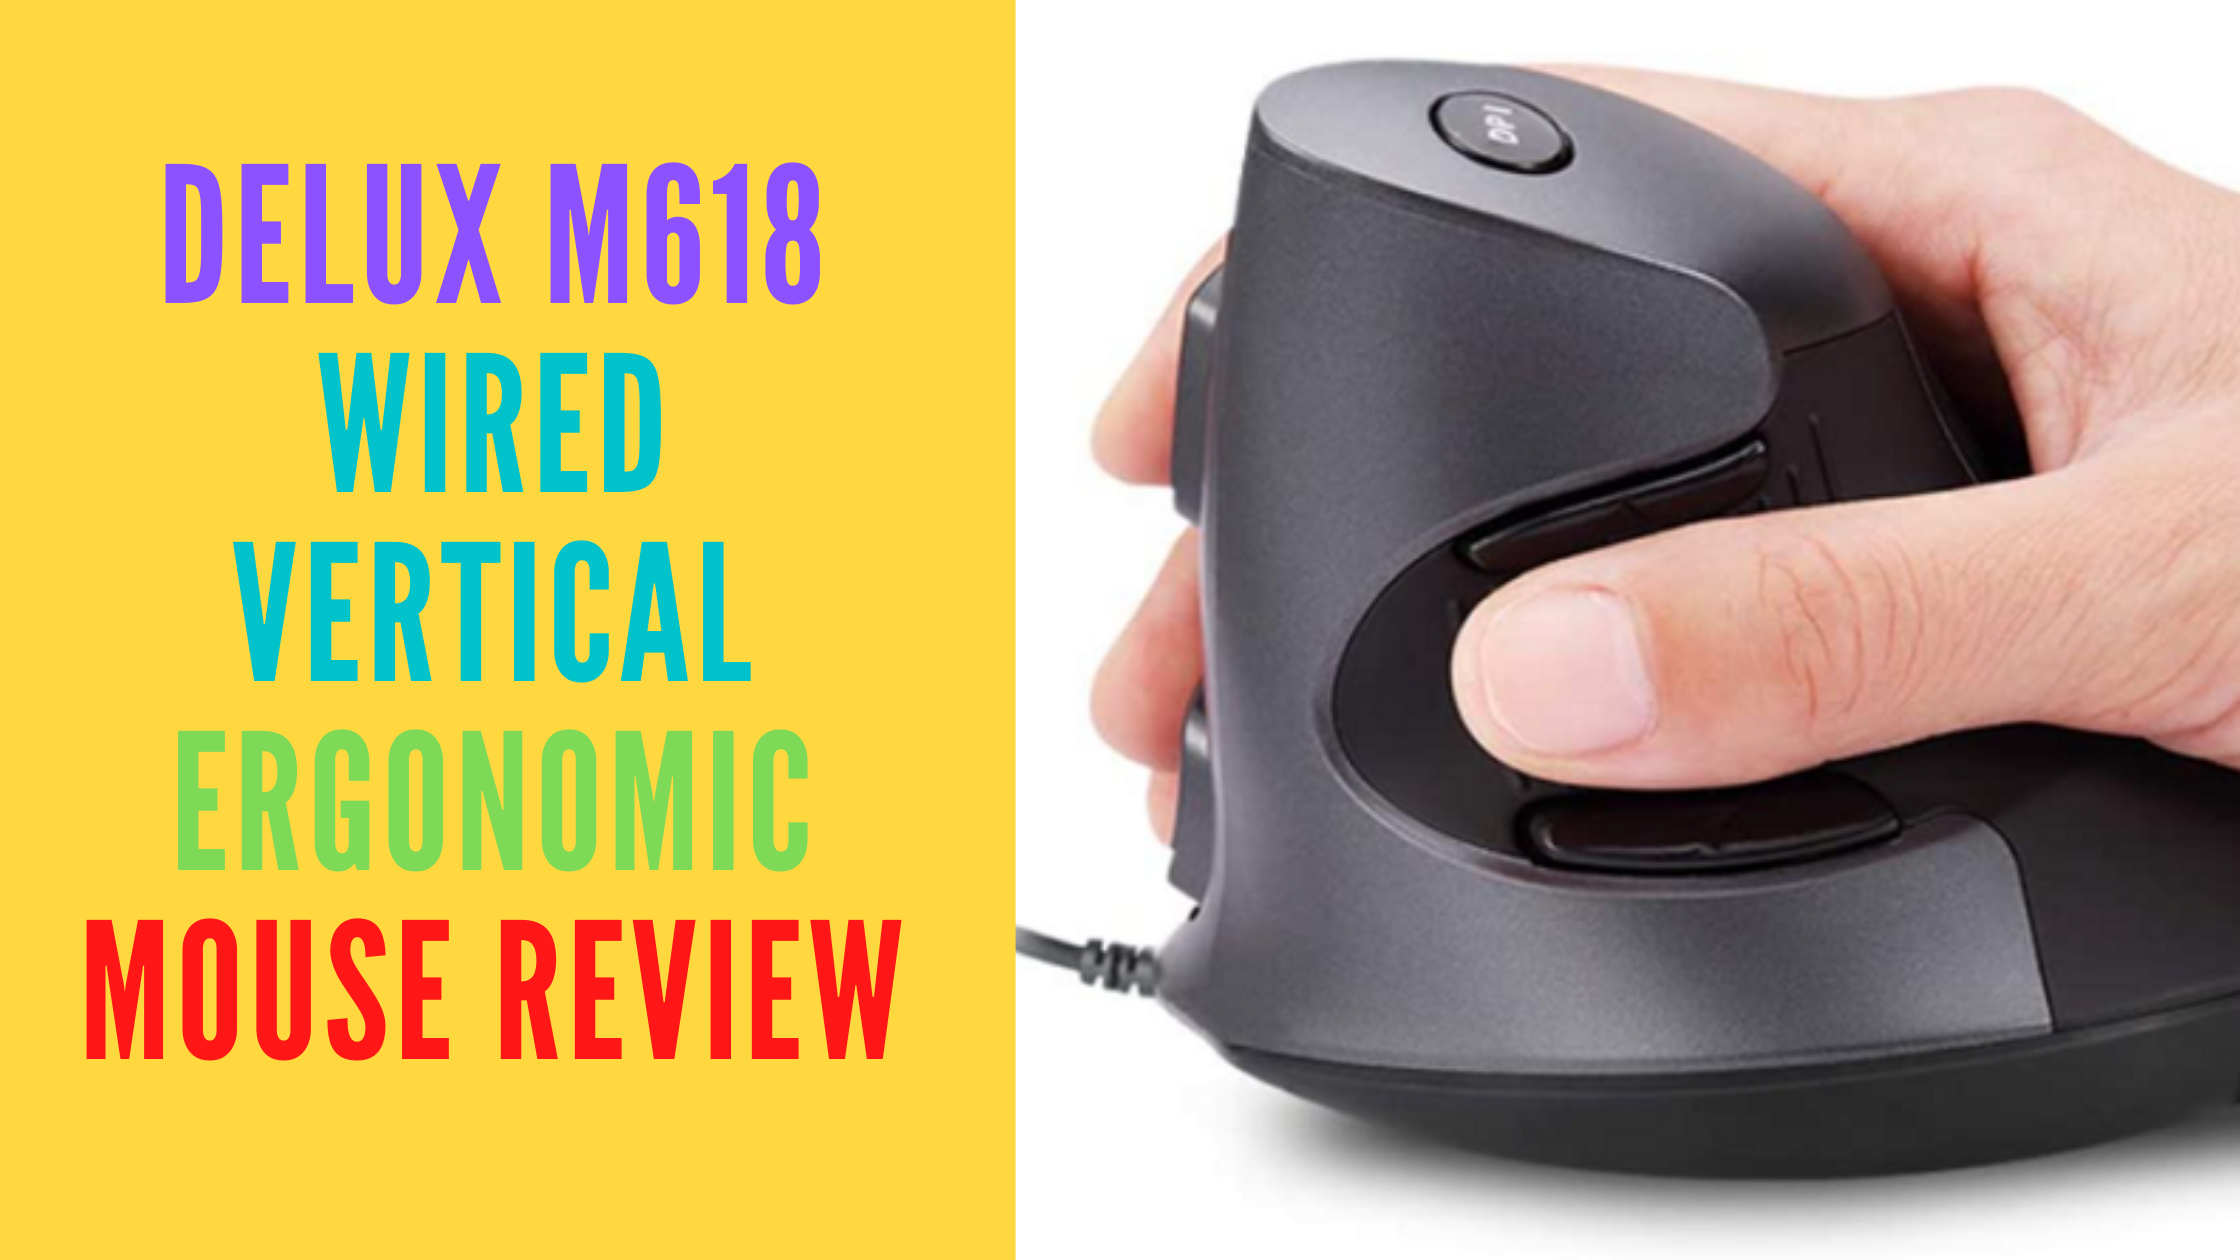 Delux M618 Wired Vertical Ergonomic Mouse Review